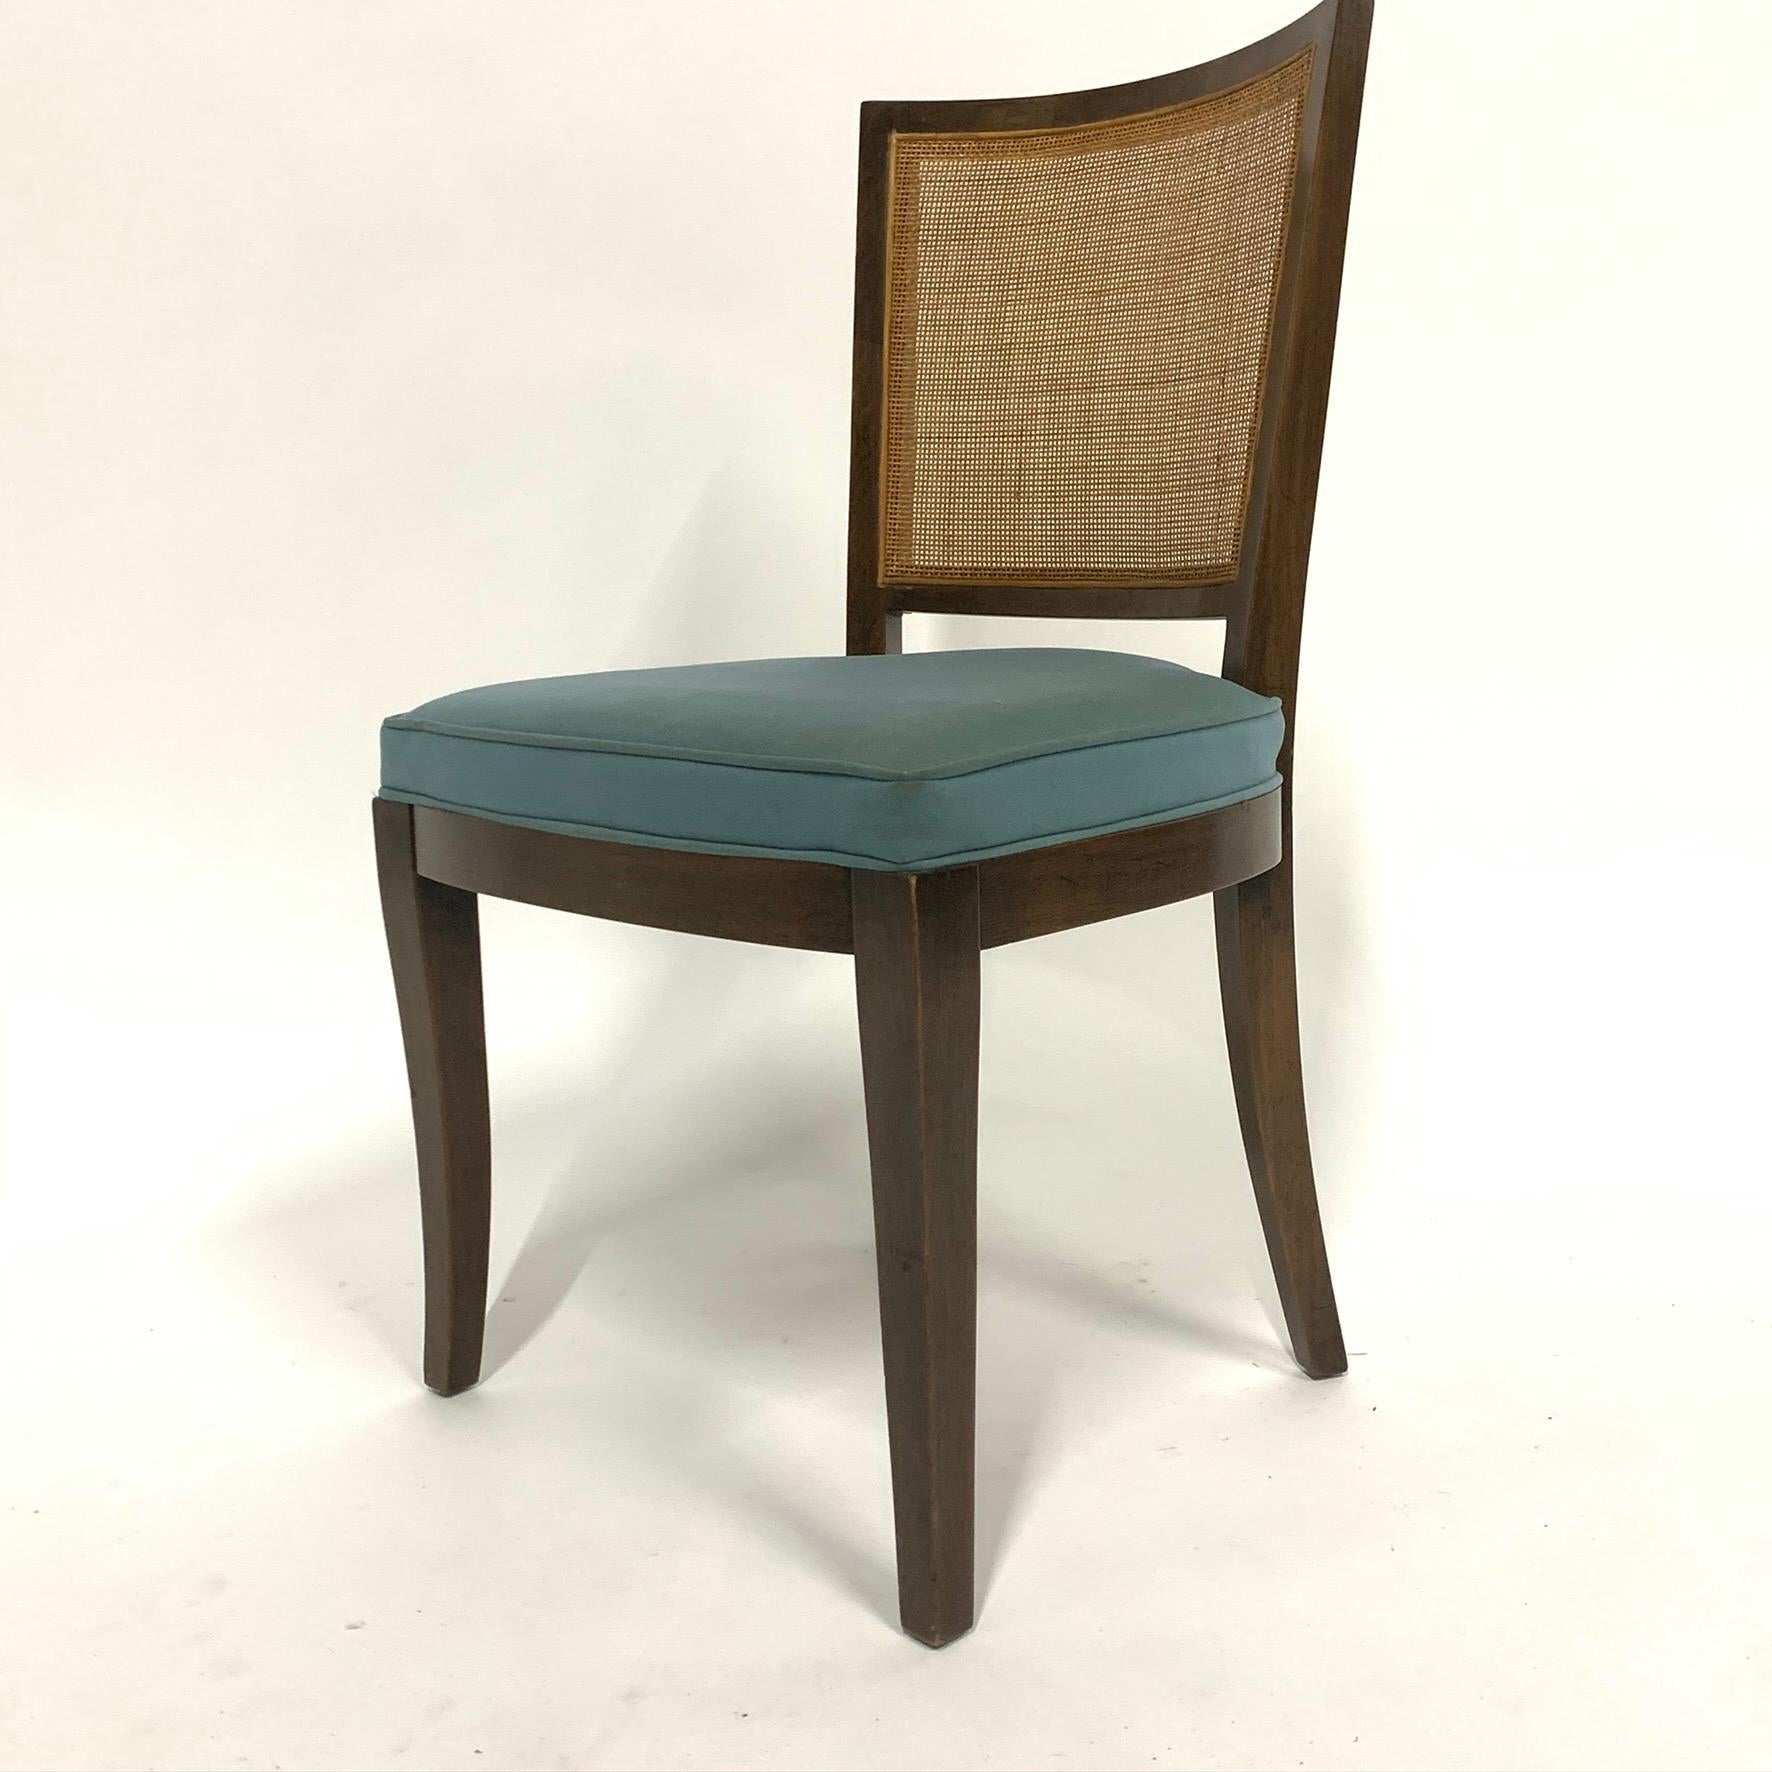 Set of stunning dining chairs designed by Bert England for Johnson Furniture’s 'Forward Trends' line. These chairs are in good original condition. All cane is intact and good.